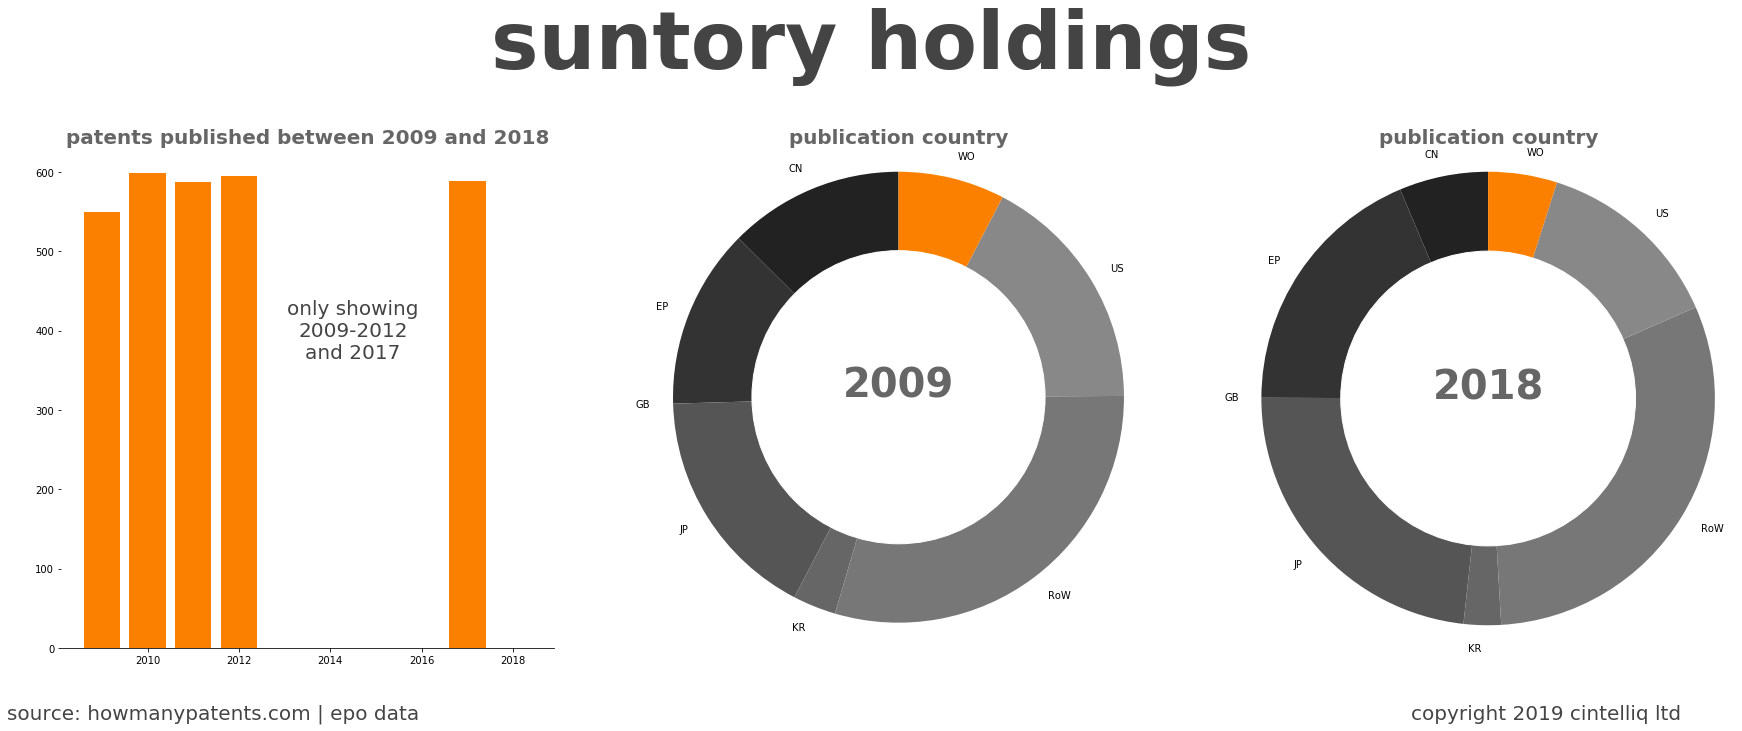 summary of patents for Suntory Holdings